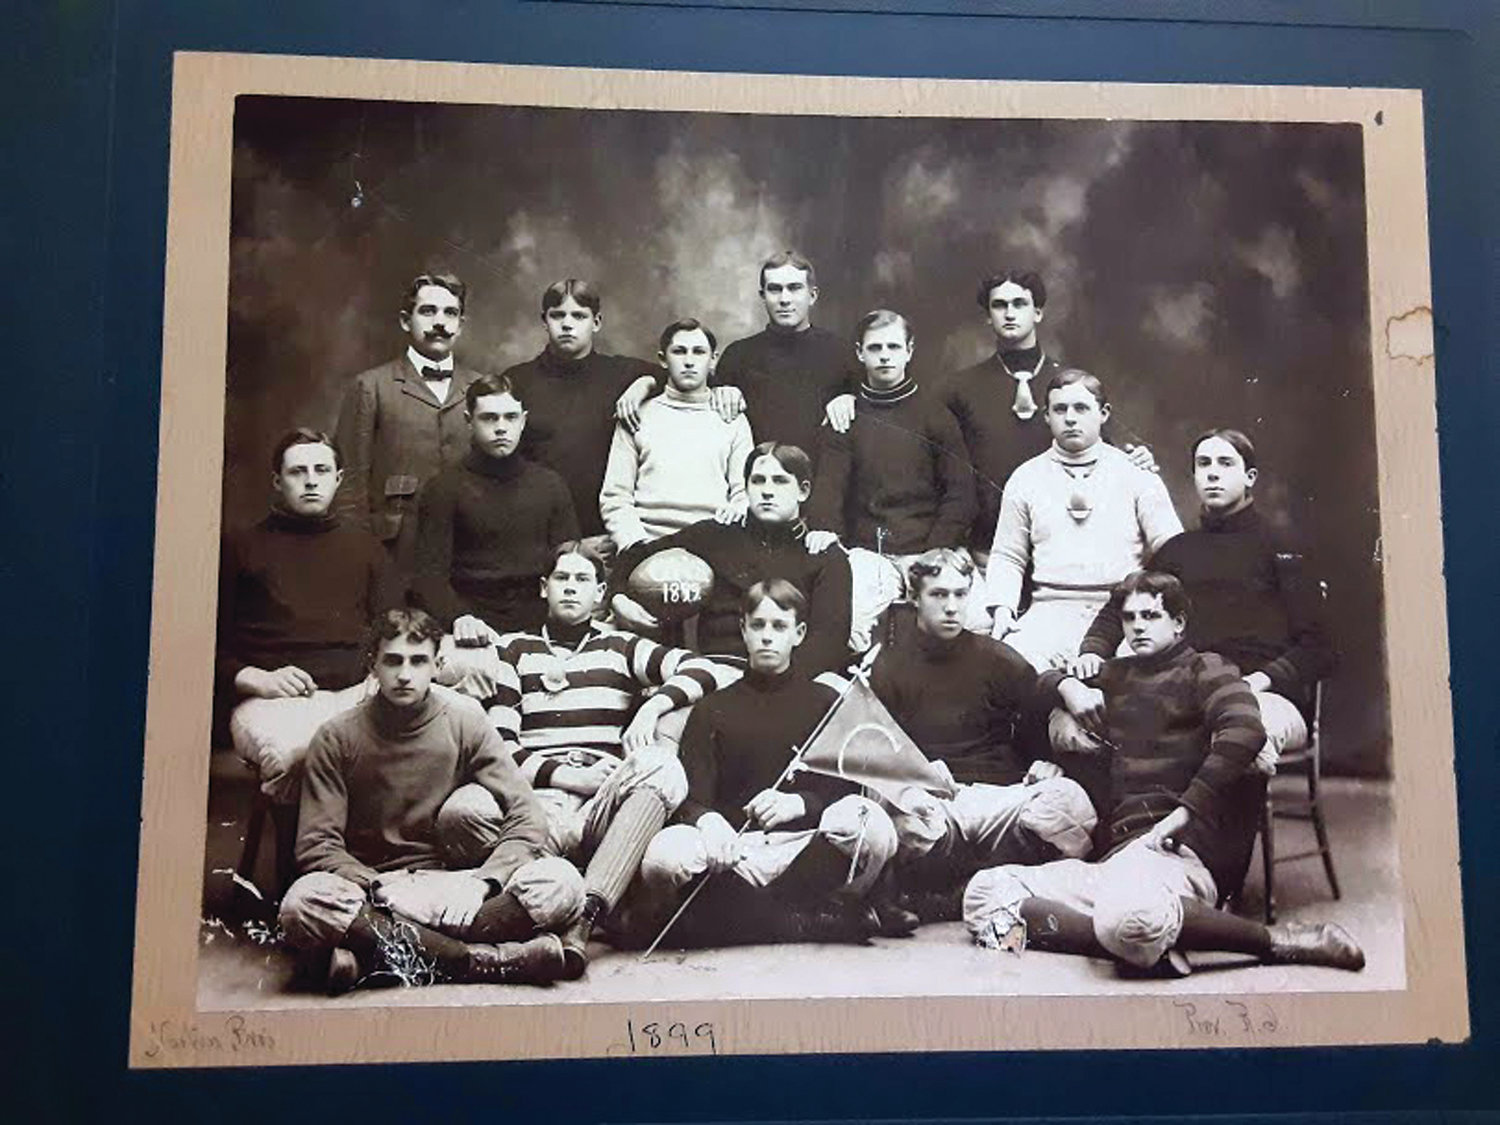 HISTORICAL PHOTOS: This is just one of the photos found in the Alumni Association’s room housed at Cranston East, dating back to 1899.